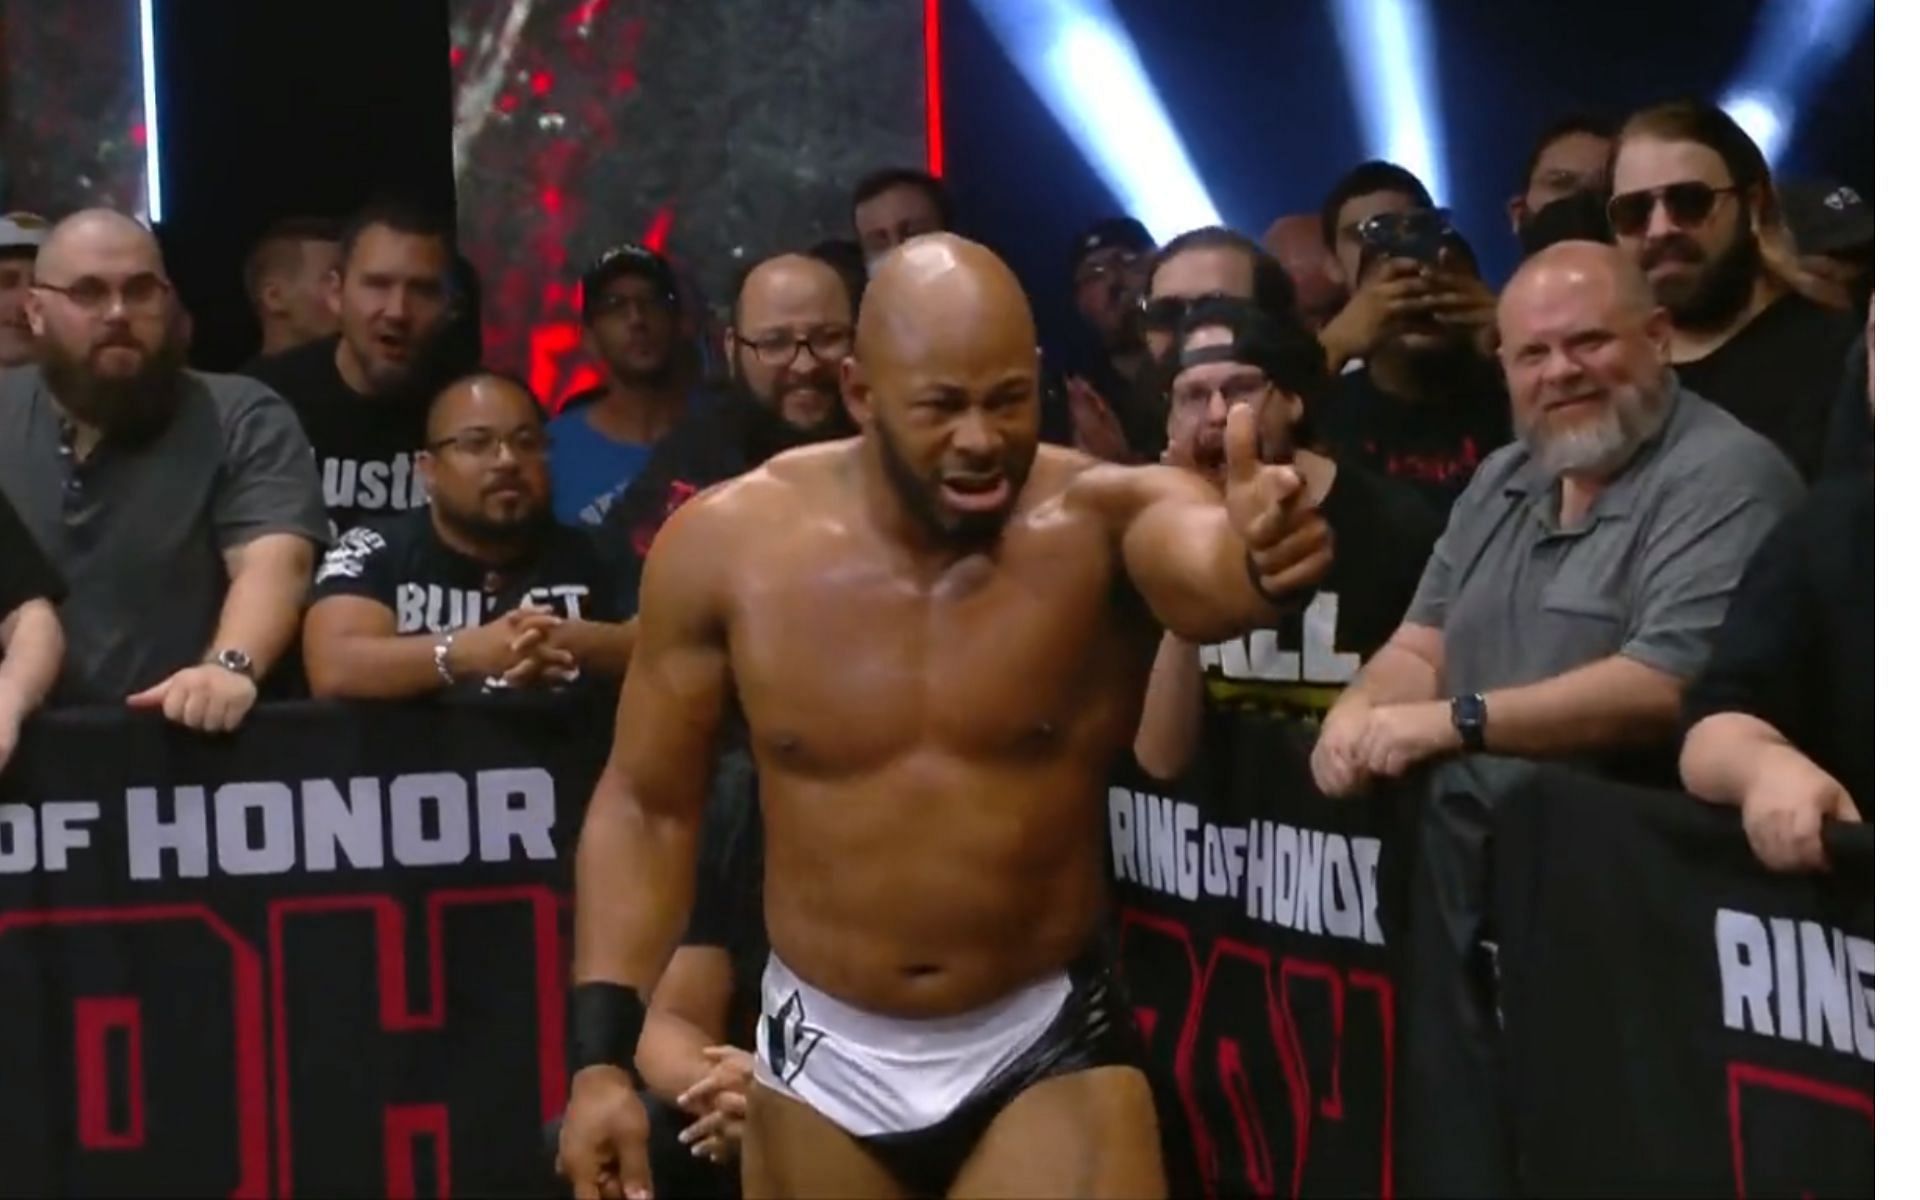 Jay Lethal faced a returning former WWE Superstar at ROH Death Before Dishonor.